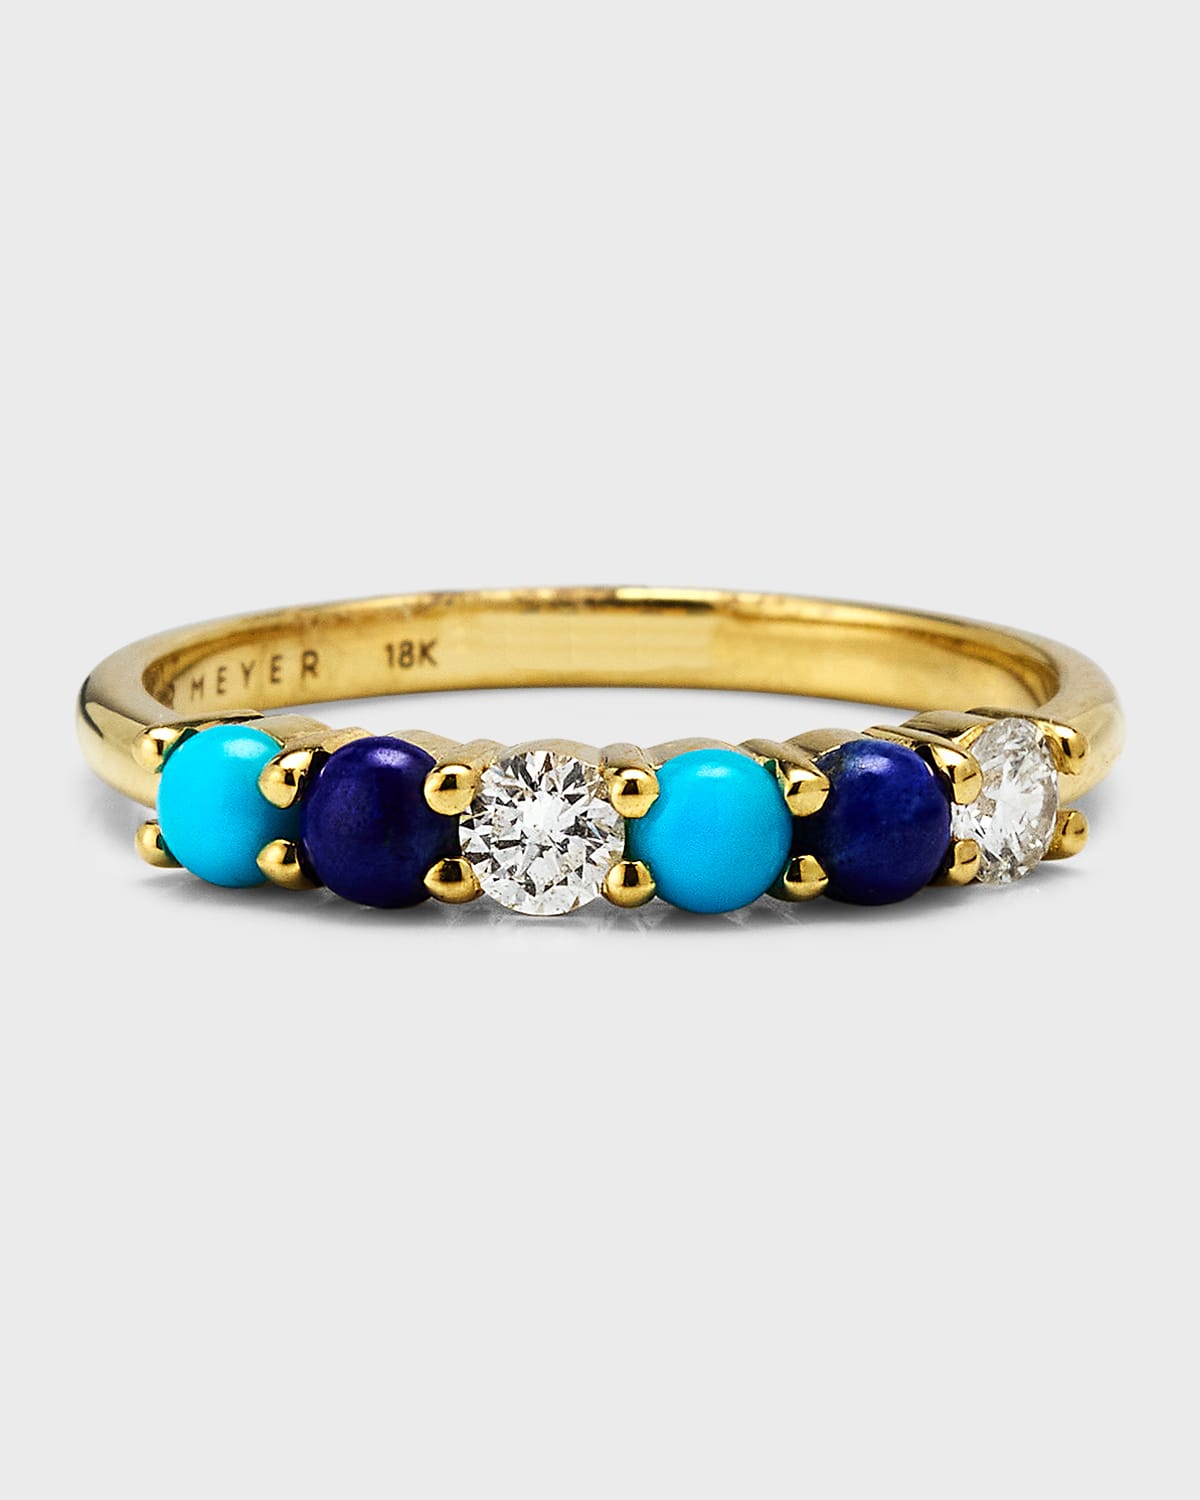 18K Yellow Gold 4 Prong Ring with Diamonds, Lapis and Turquoise, Size 6.5